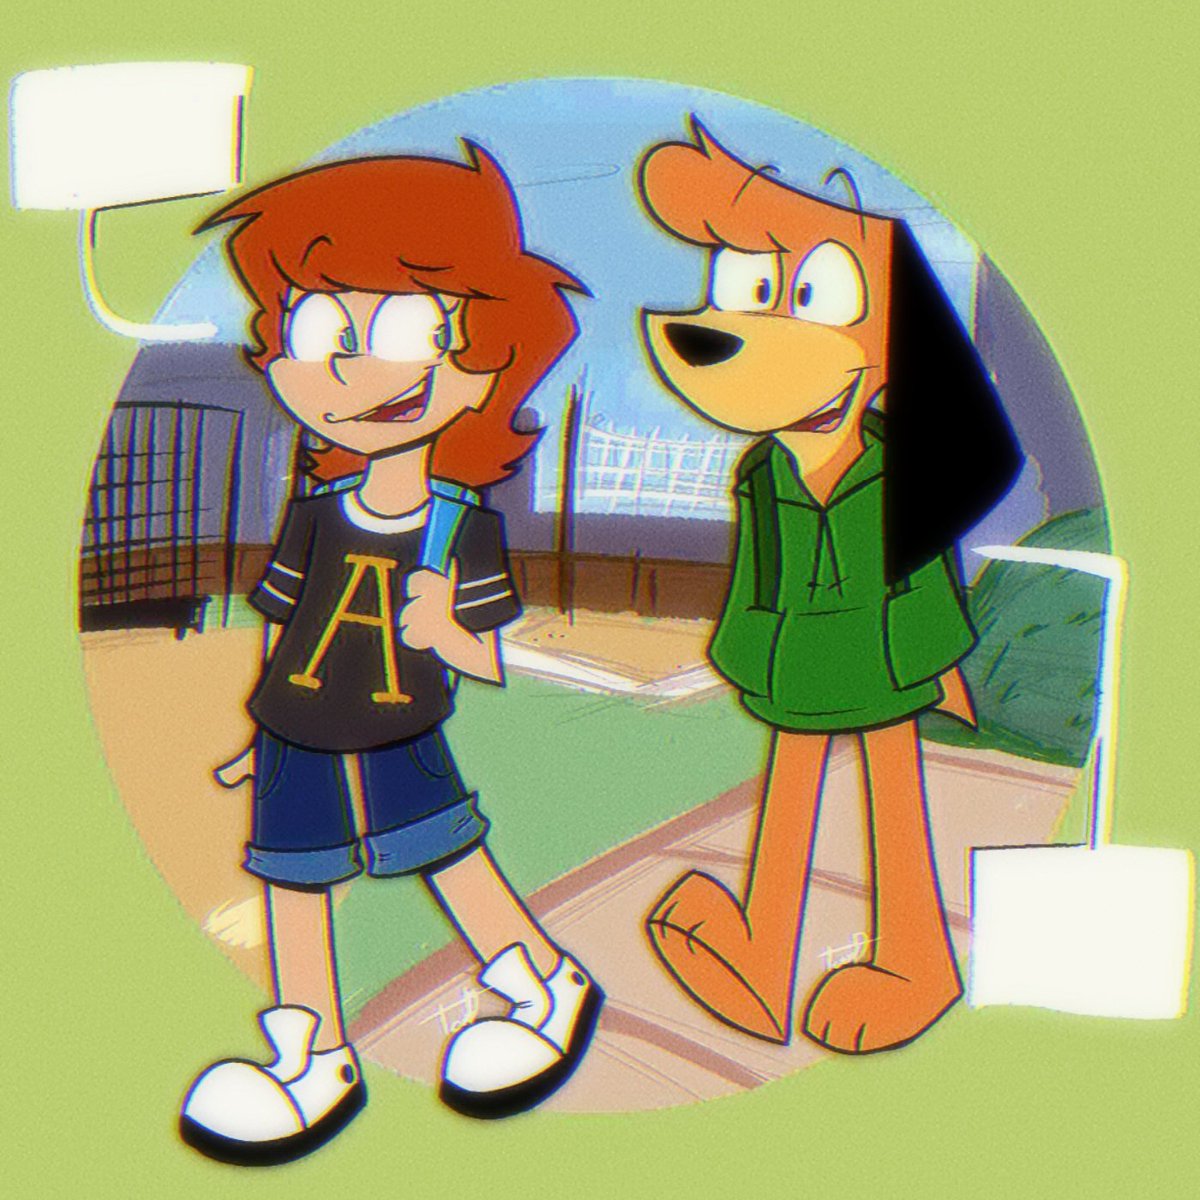 Hey, Augie! : A Chat After School 
-------
[#hannabarbera]